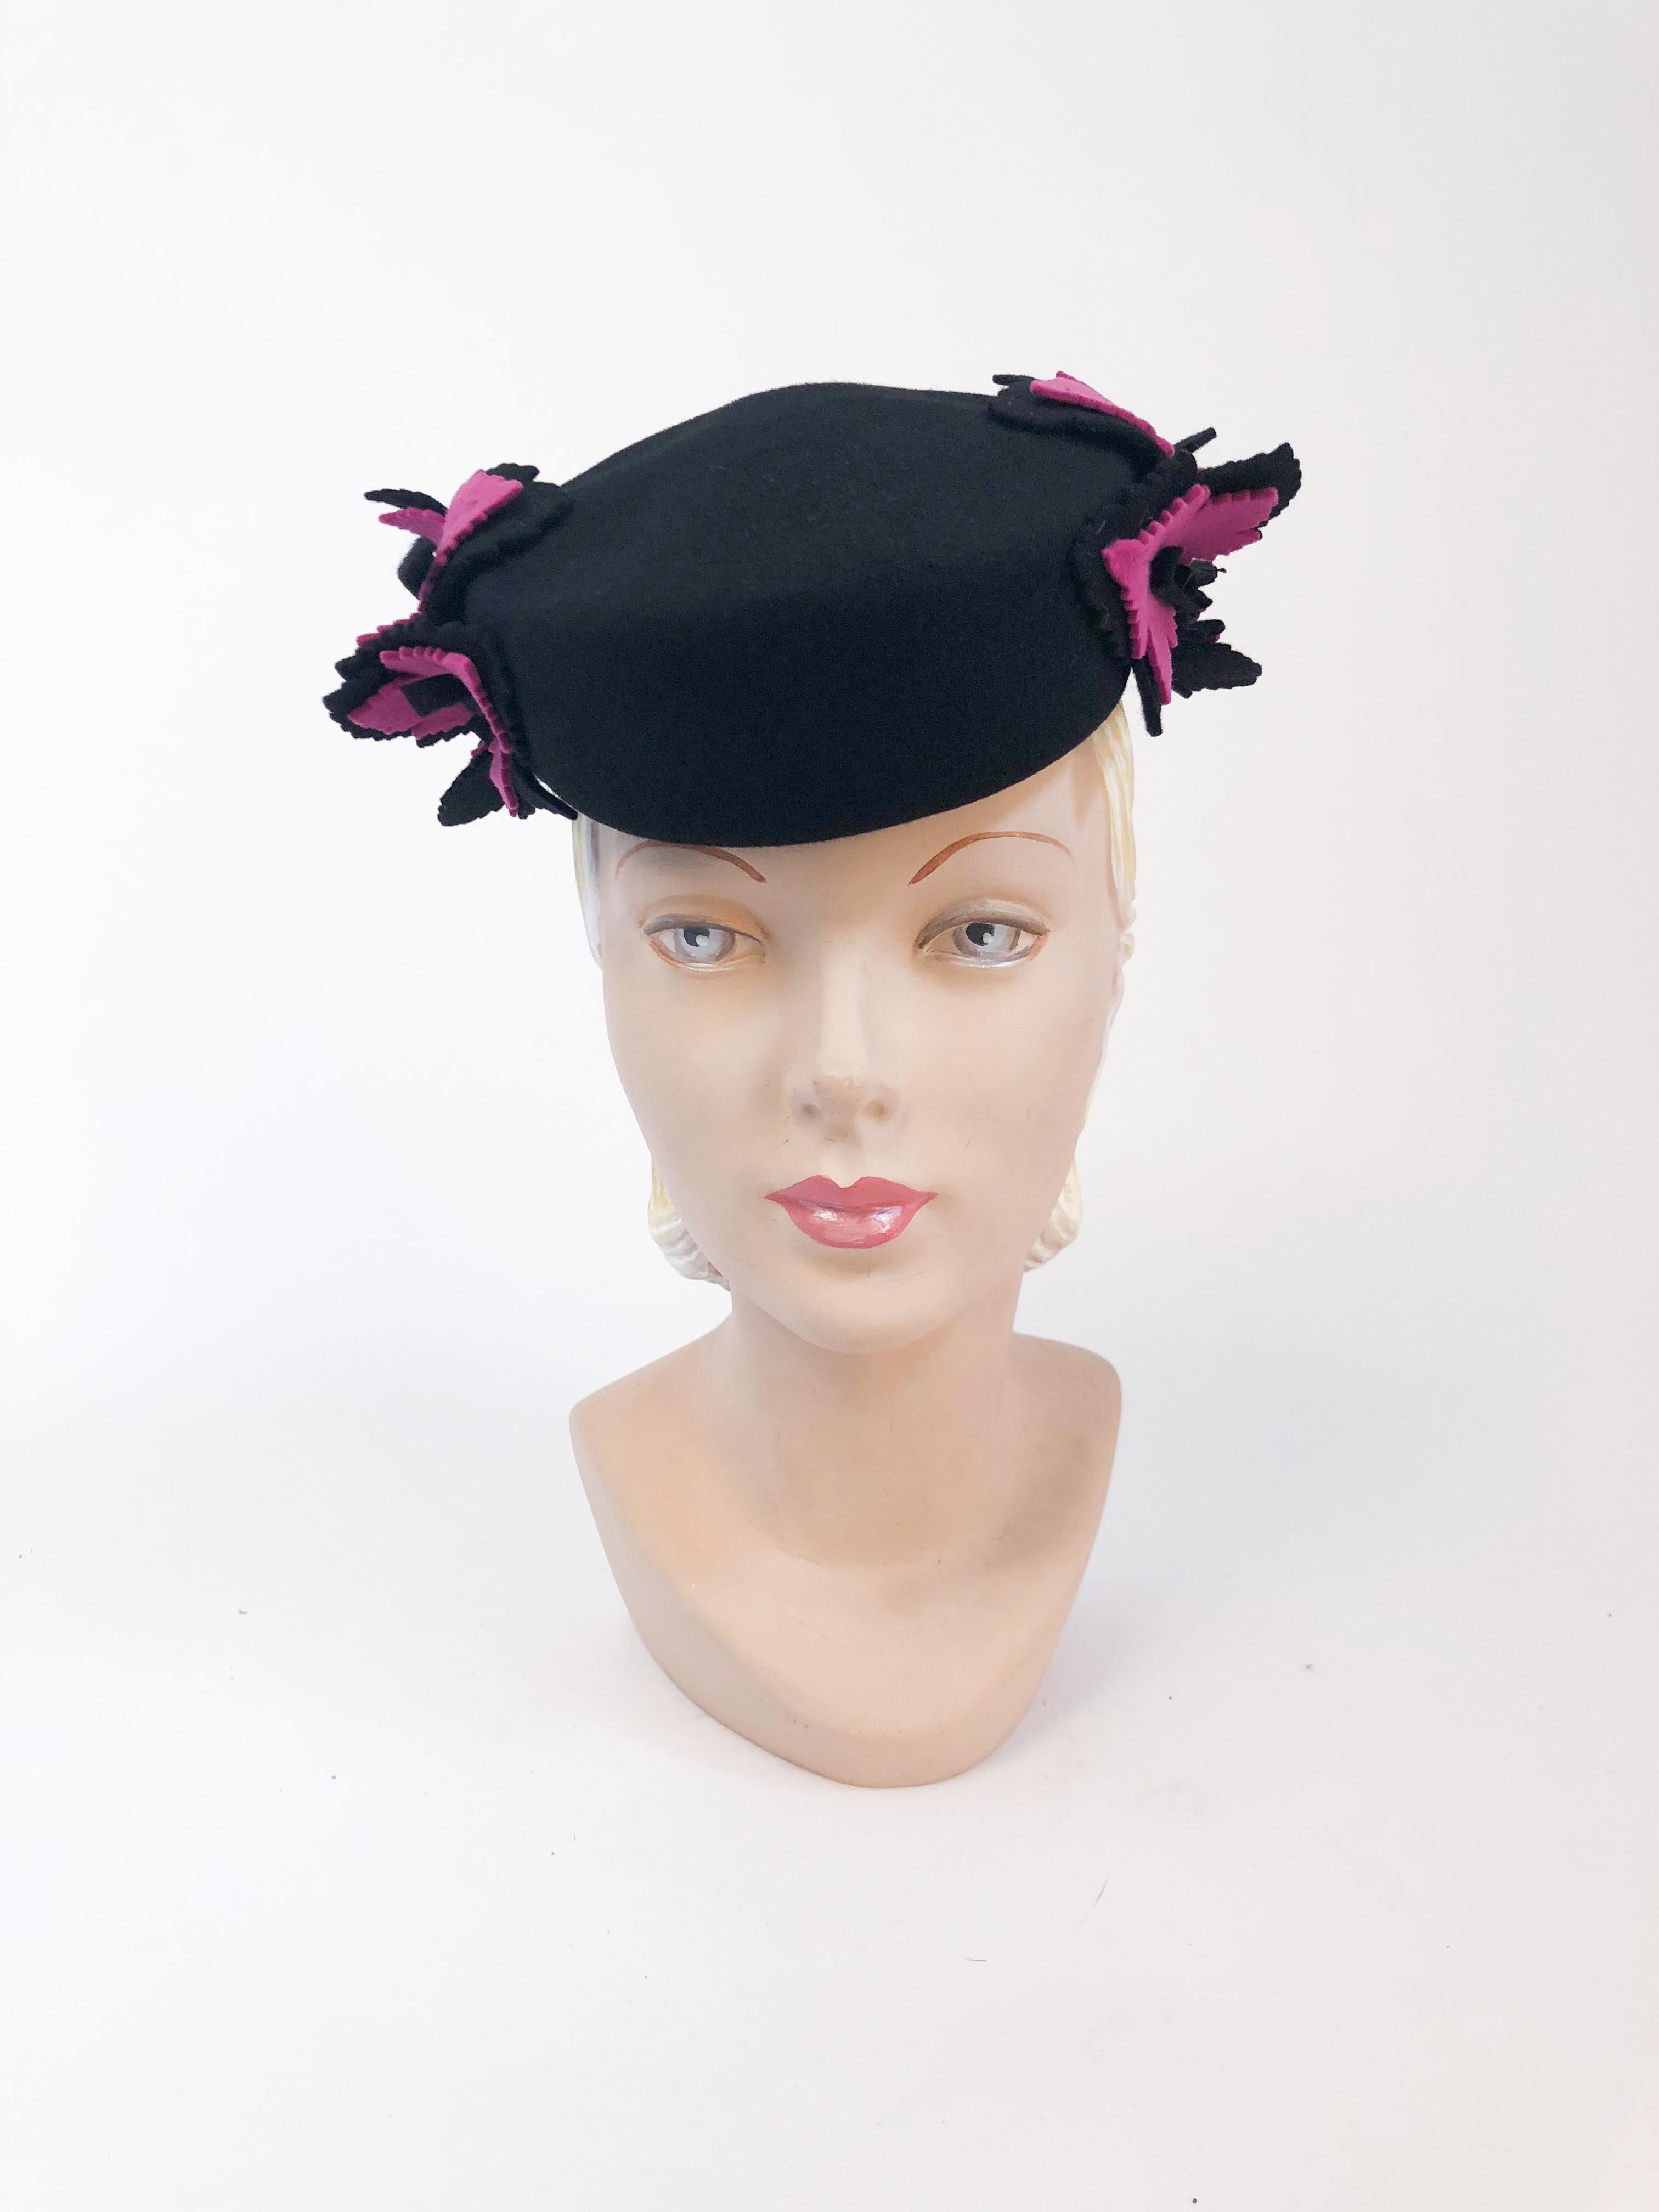 1940s Black and Magenta Wool Felt hat with Hand-cut leaves. Black wool felt hat with hand-cut black and magenta maple leaves, and structured keeper to hold hat in place. Also has elastic to further secure the hat to the head.